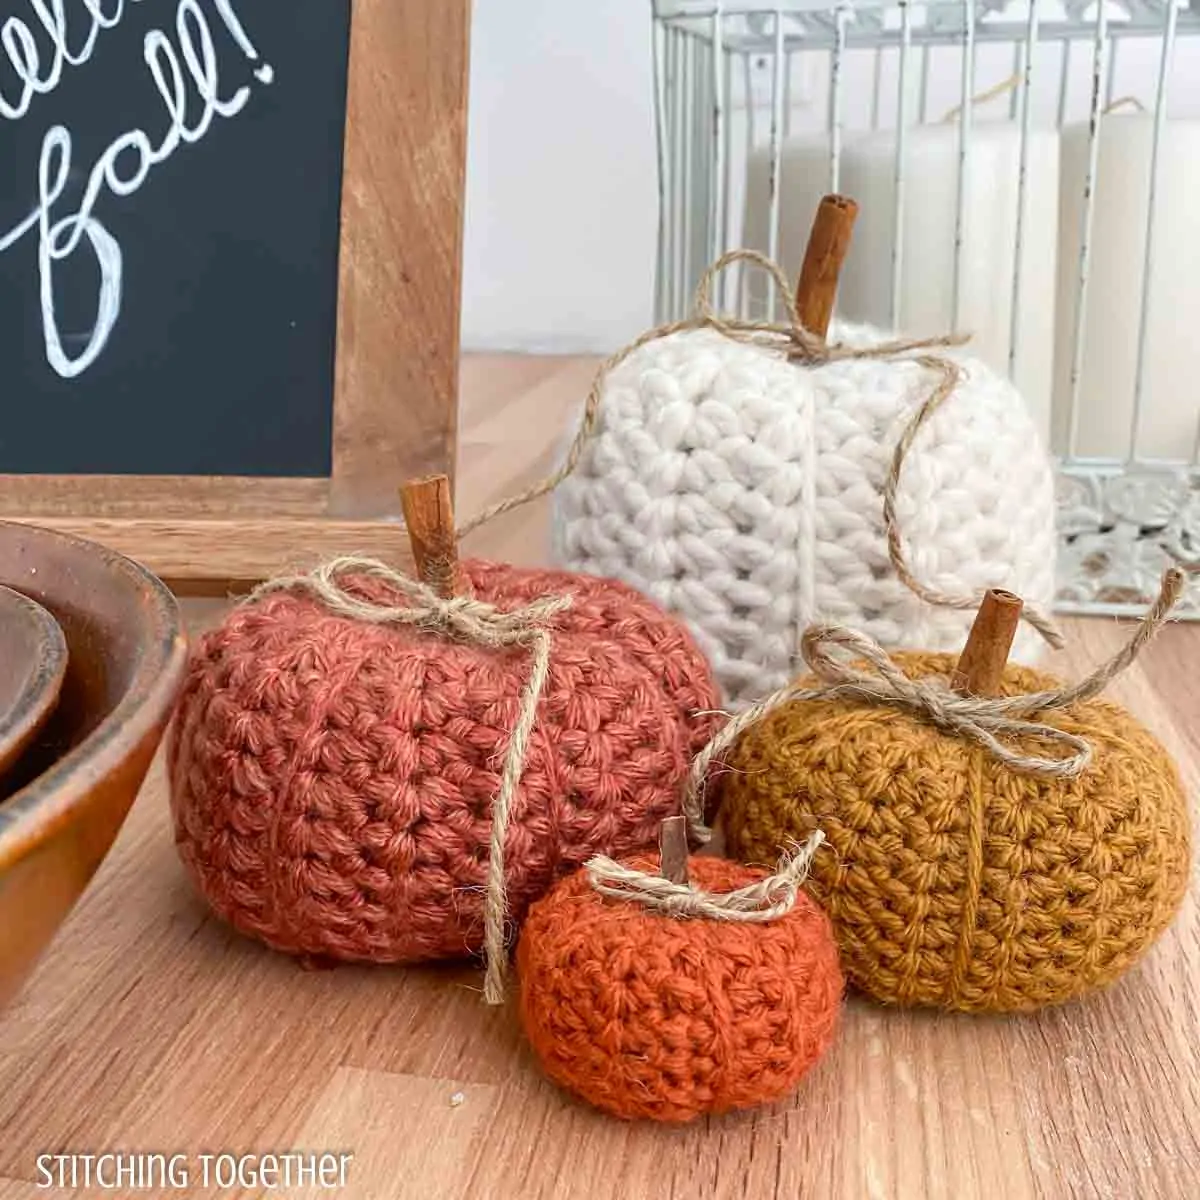 4 crochet pumpkins will surrounded by fall decor